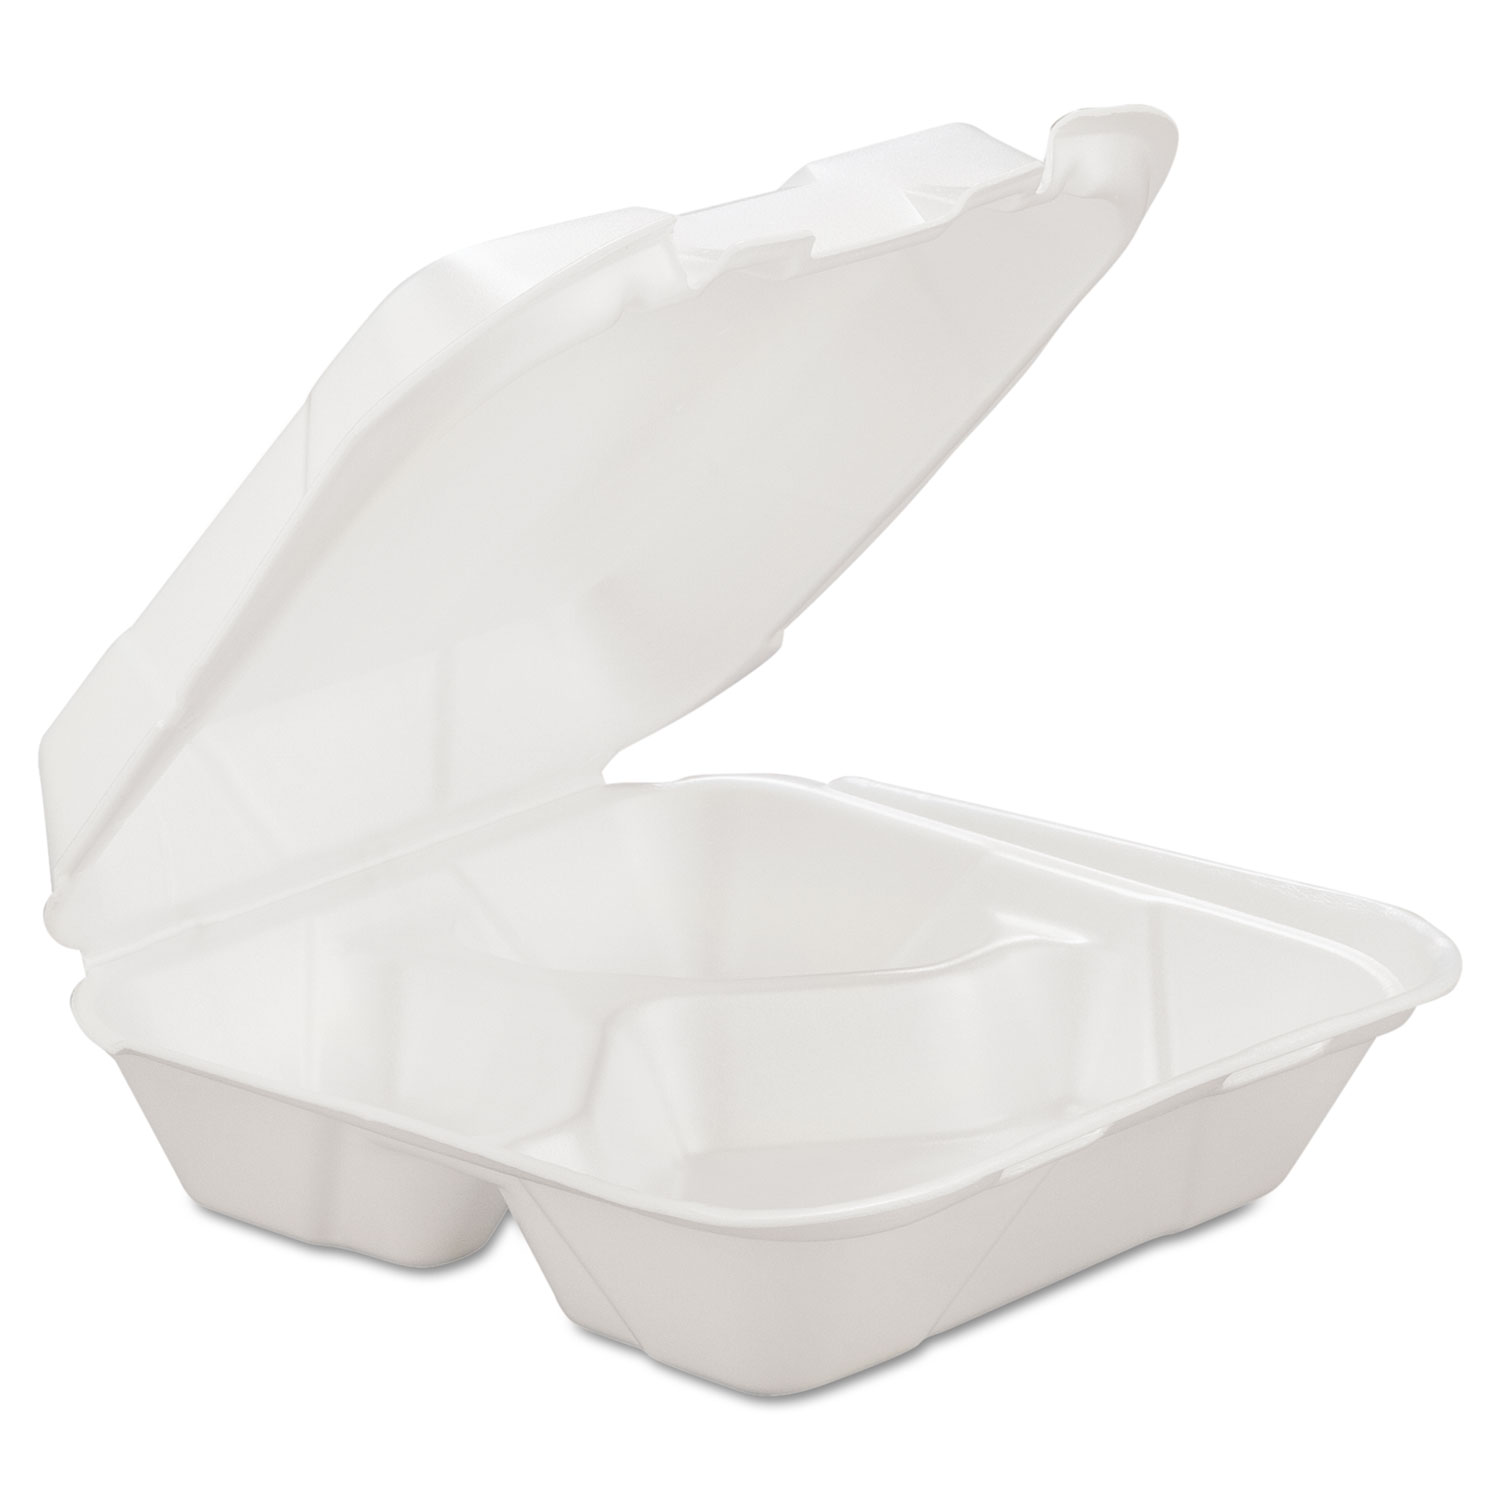  GEN SN243VW-H-0183400 Foam Hinged Carryout Container, 3-Comp, White, 8 X 8 1/4 X 3, 200/Carton (GENHINGEDM3) 